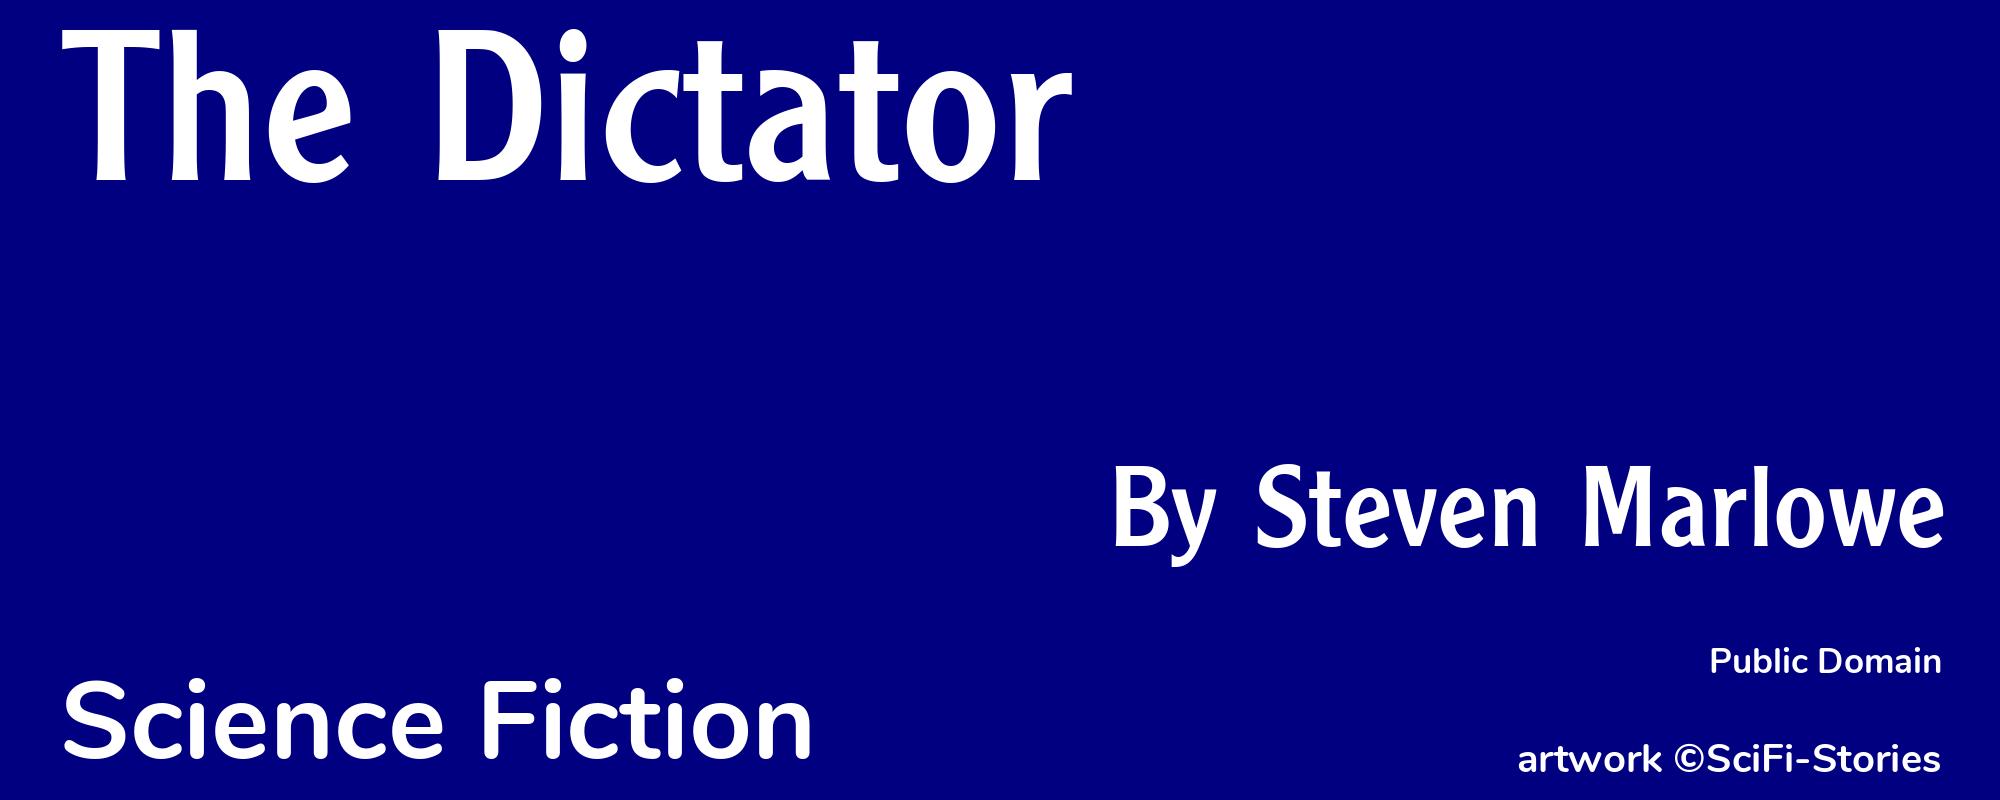 The Dictator - Cover